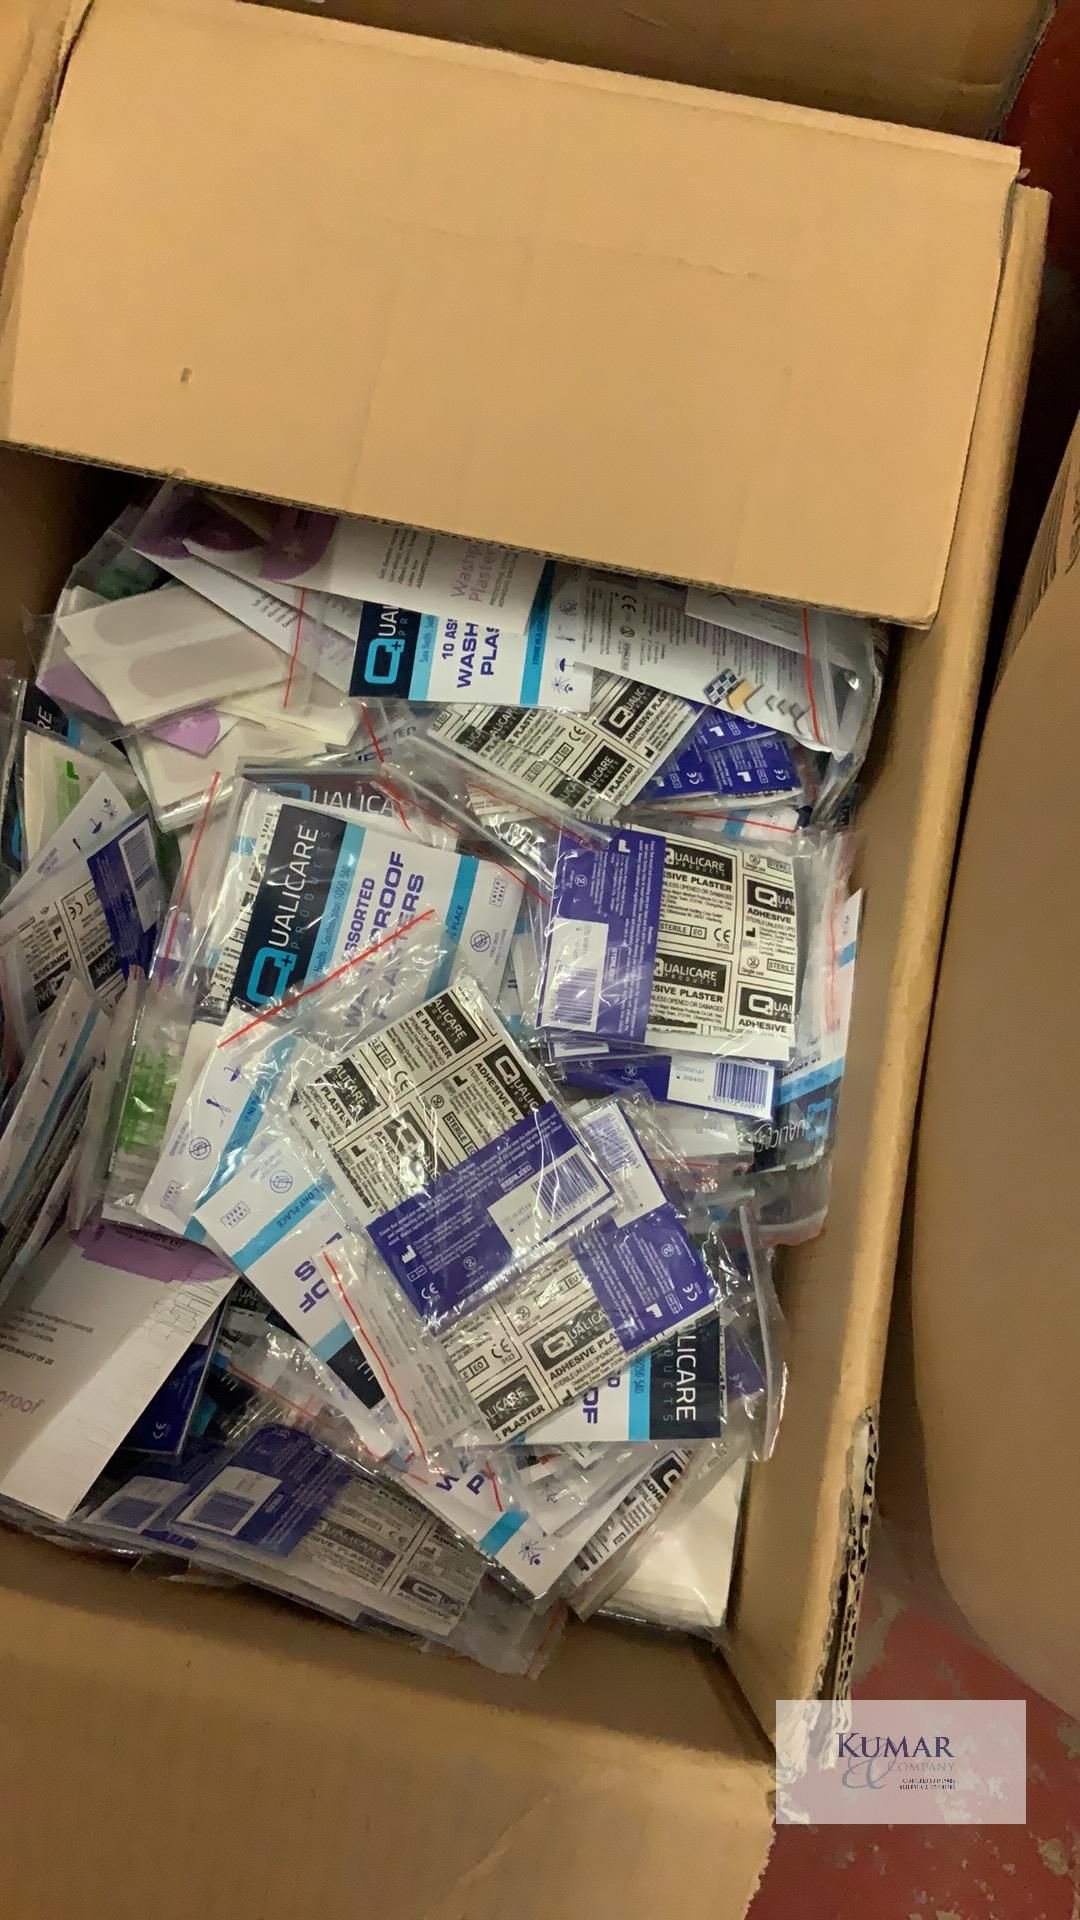 3: Large Boxes of 10 & 20 Qualicare Products Assorted Washproof Plasters (03/2025) - Thousands of - Image 6 of 9